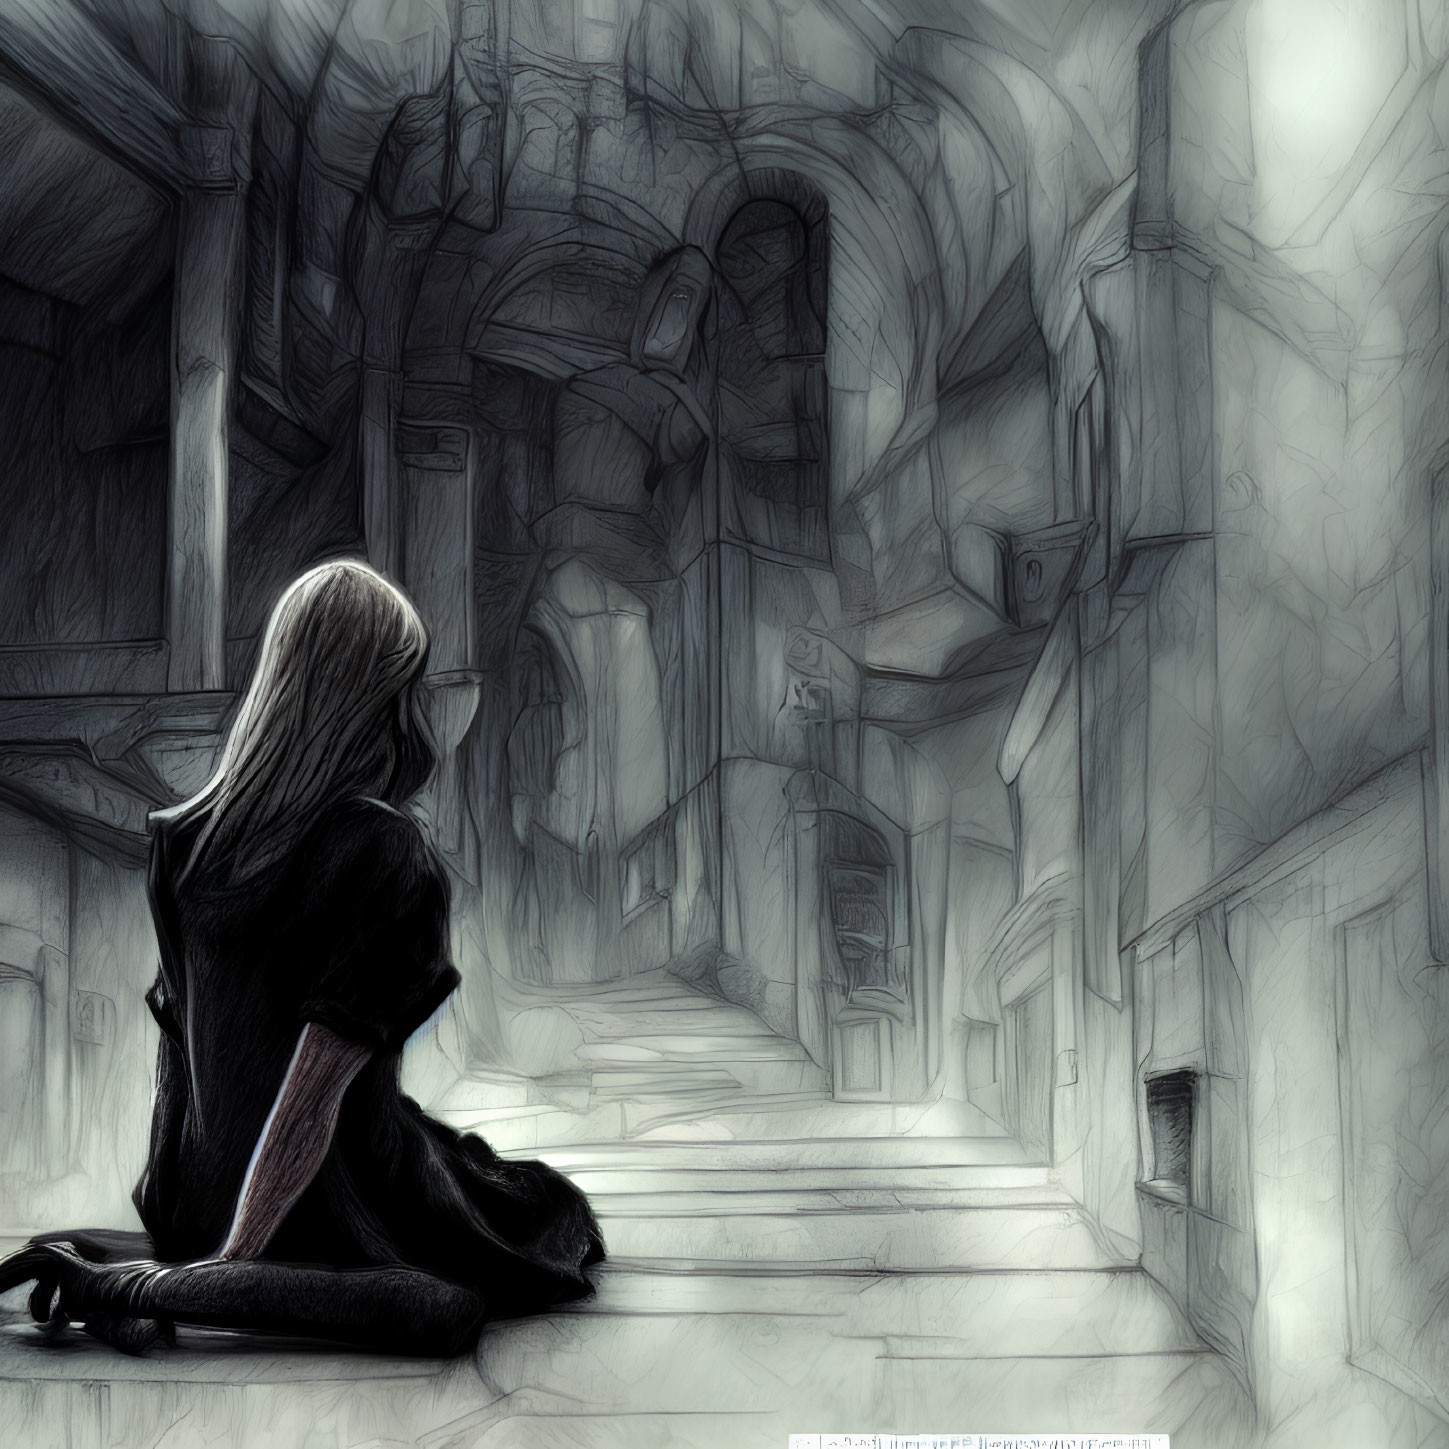 Sketch of person with long hair on stairs in gothic corridor.